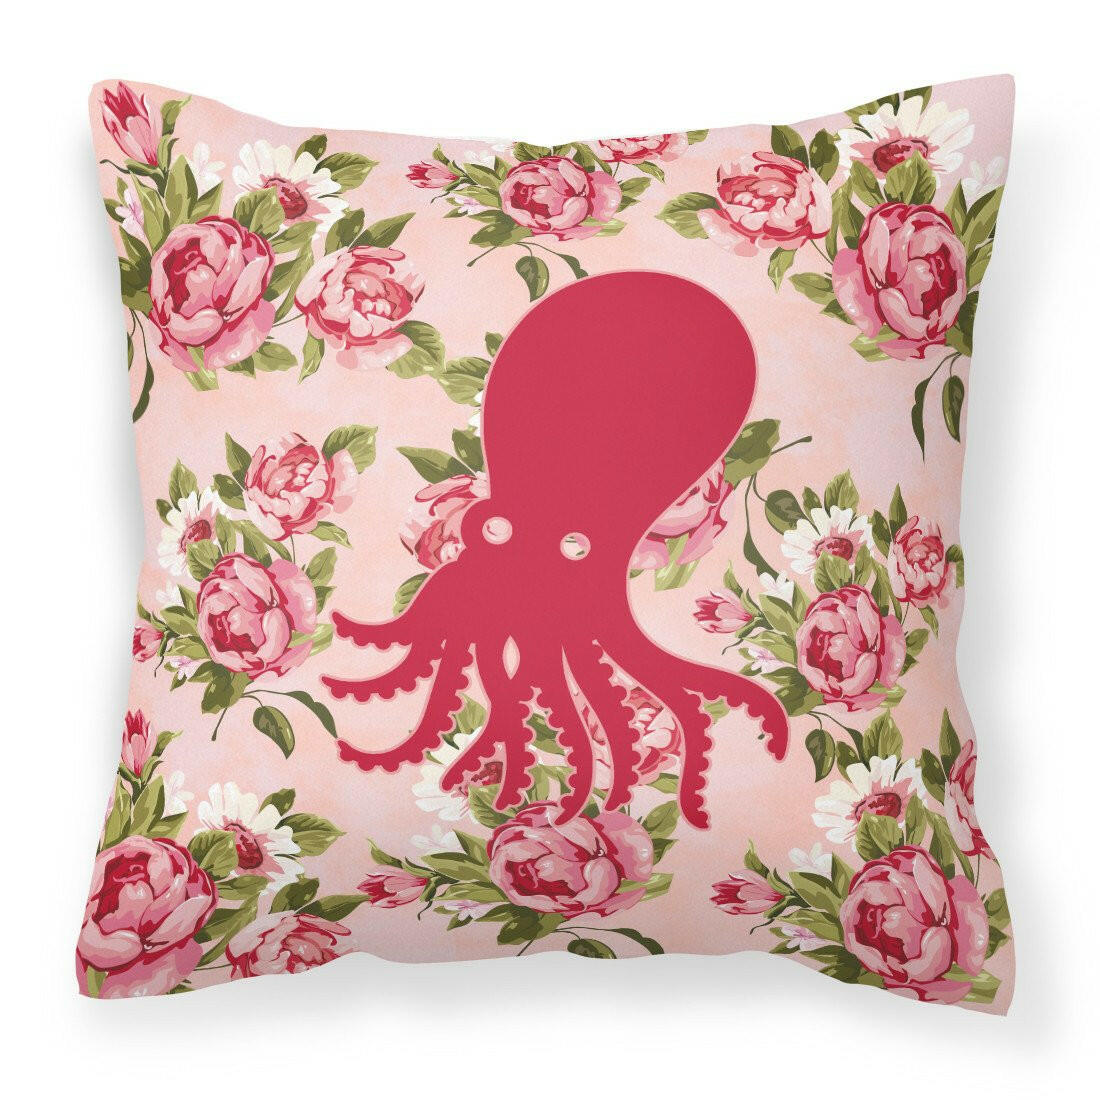 Octopus Shabby Chic Pink Roses  Fabric Decorative Pillow BB1098-RS-PK-PW1414 - the-store.com